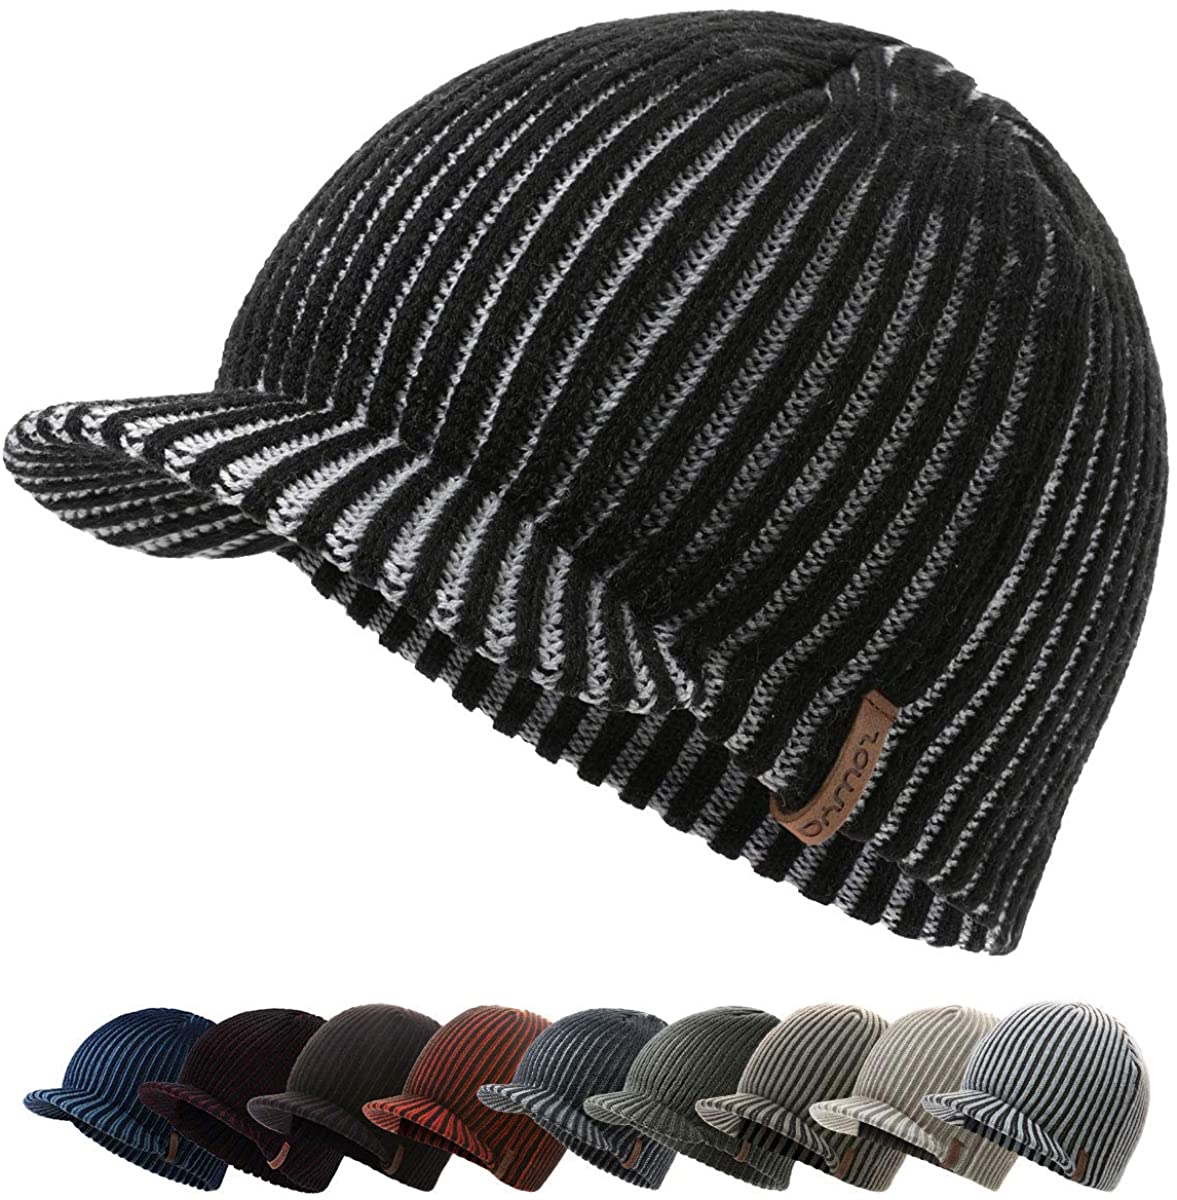 Mens and Womens Skullies Beanies is More Democracy Classic Toboggan Hat Sports & Outdoors Warm Hat Gray 